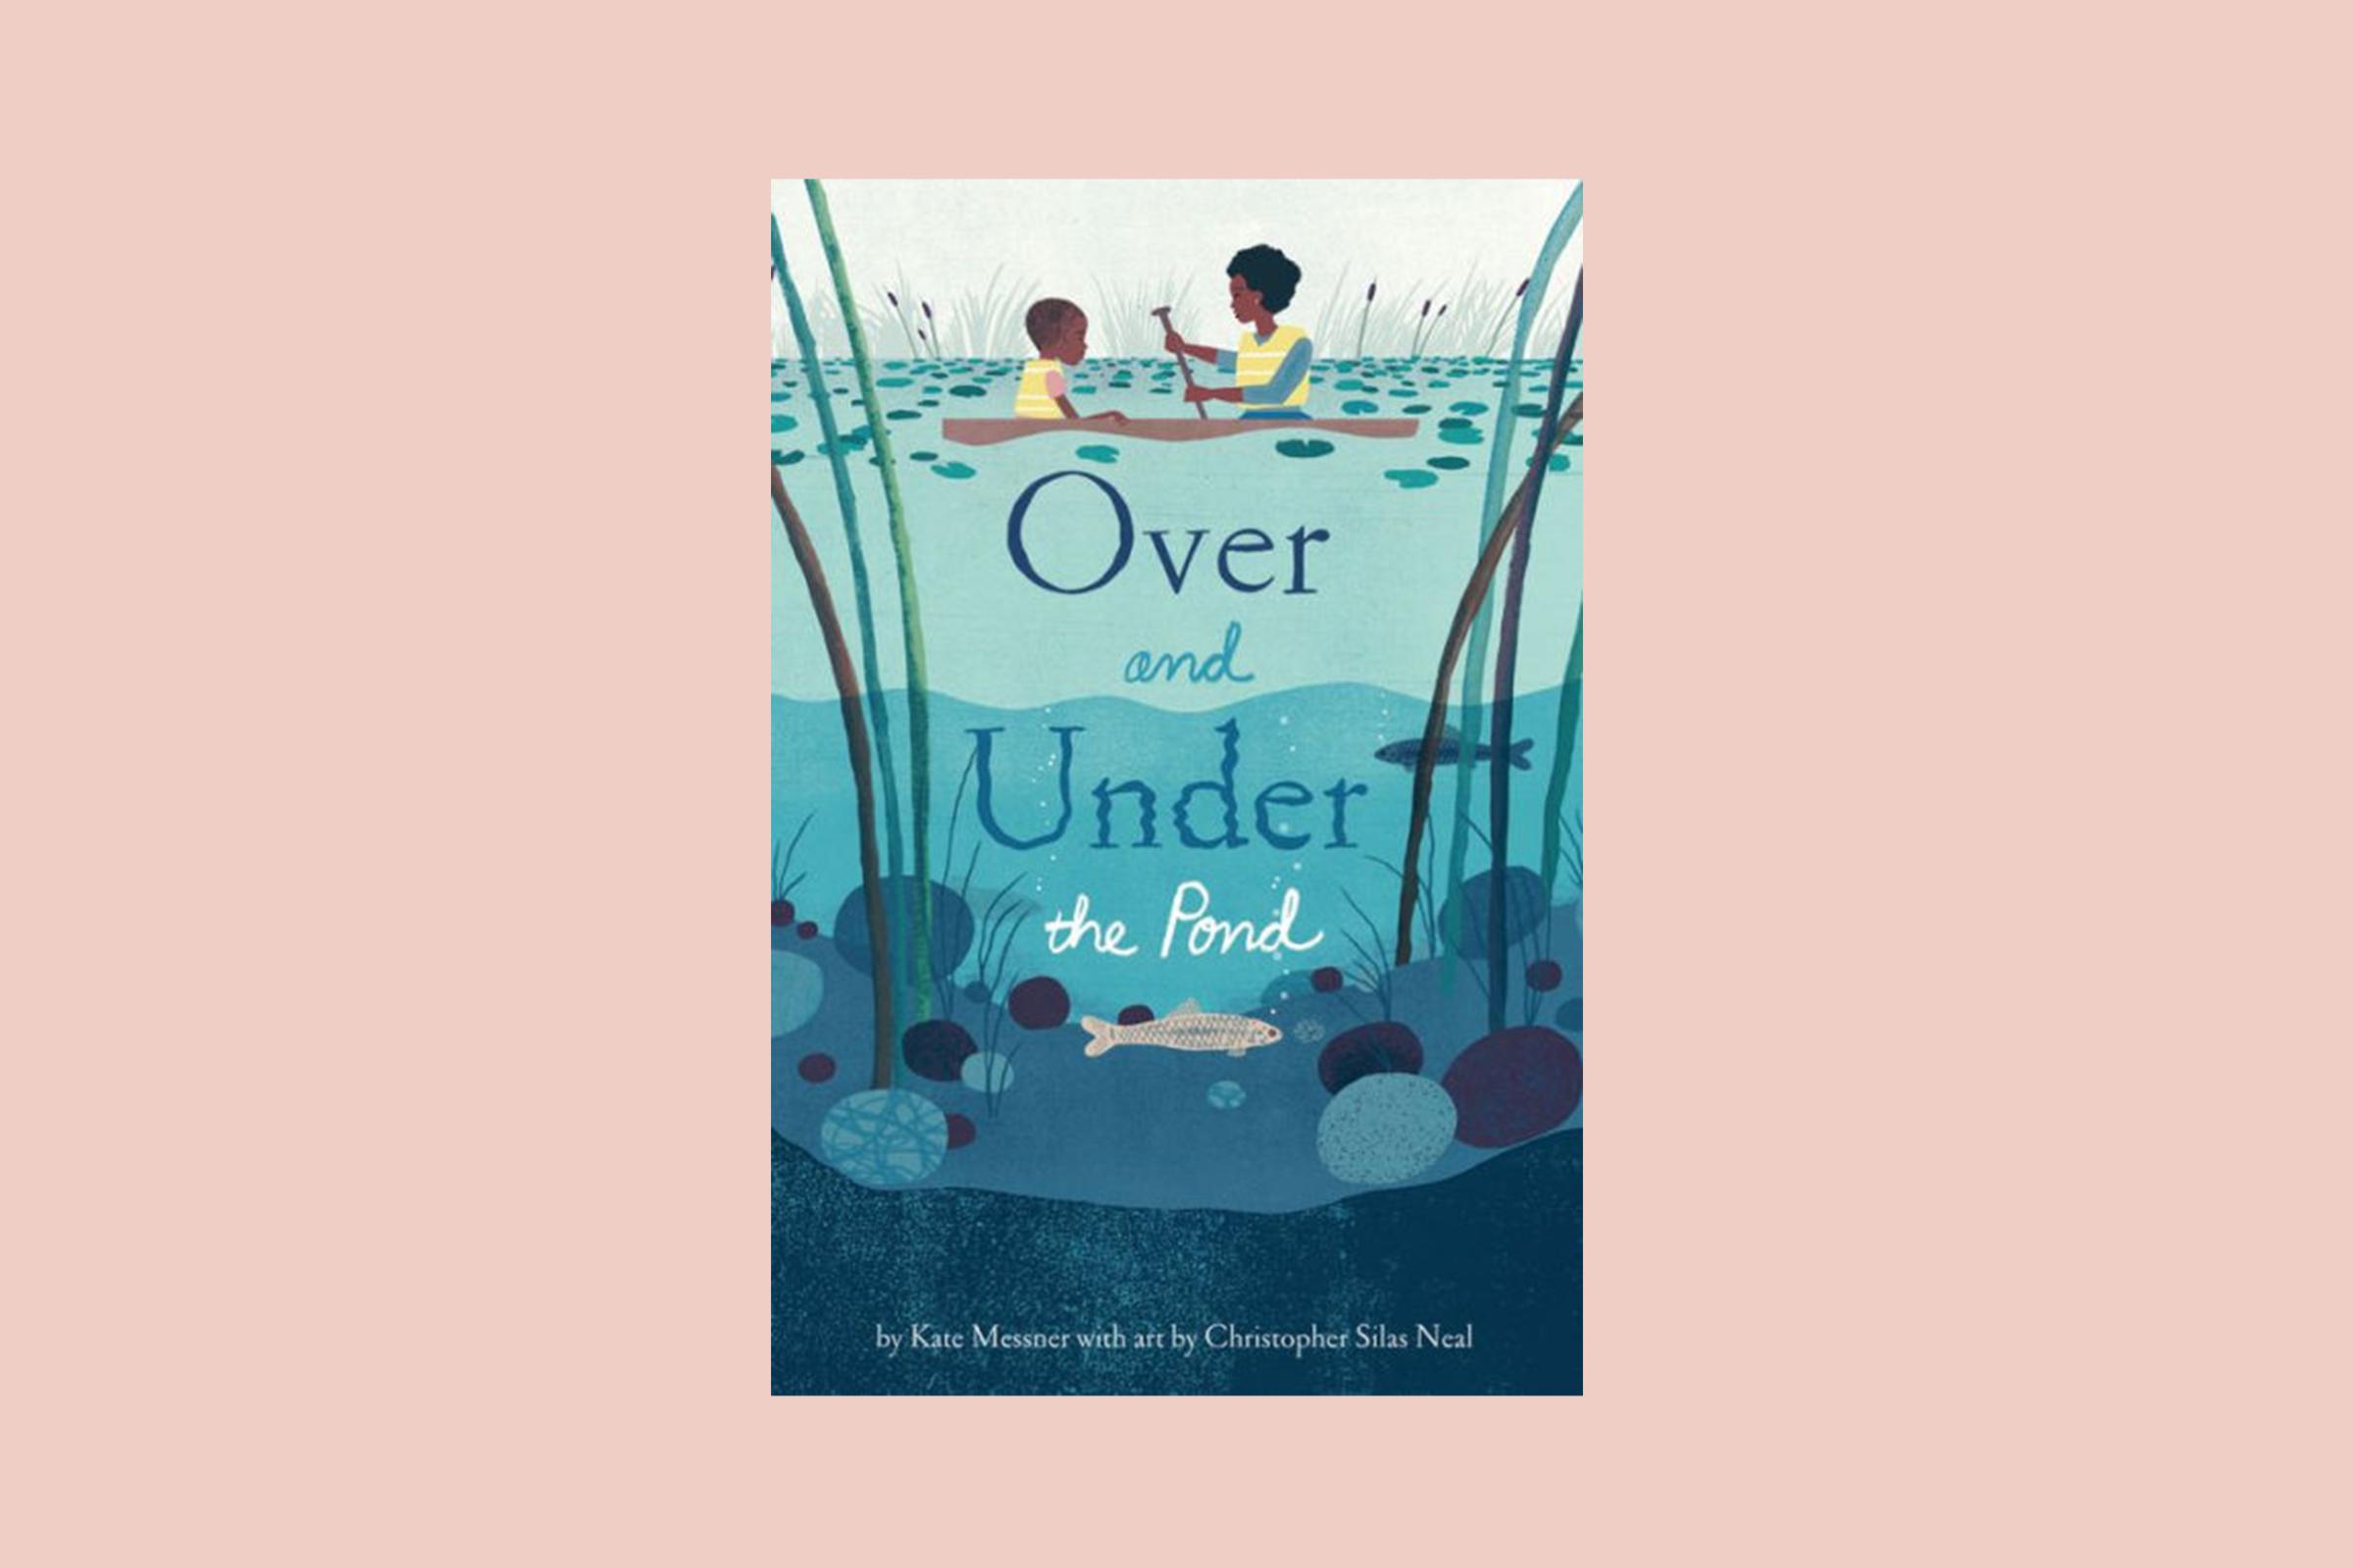 Over and Under the Pond is one of the top 10 young adult books of 2017